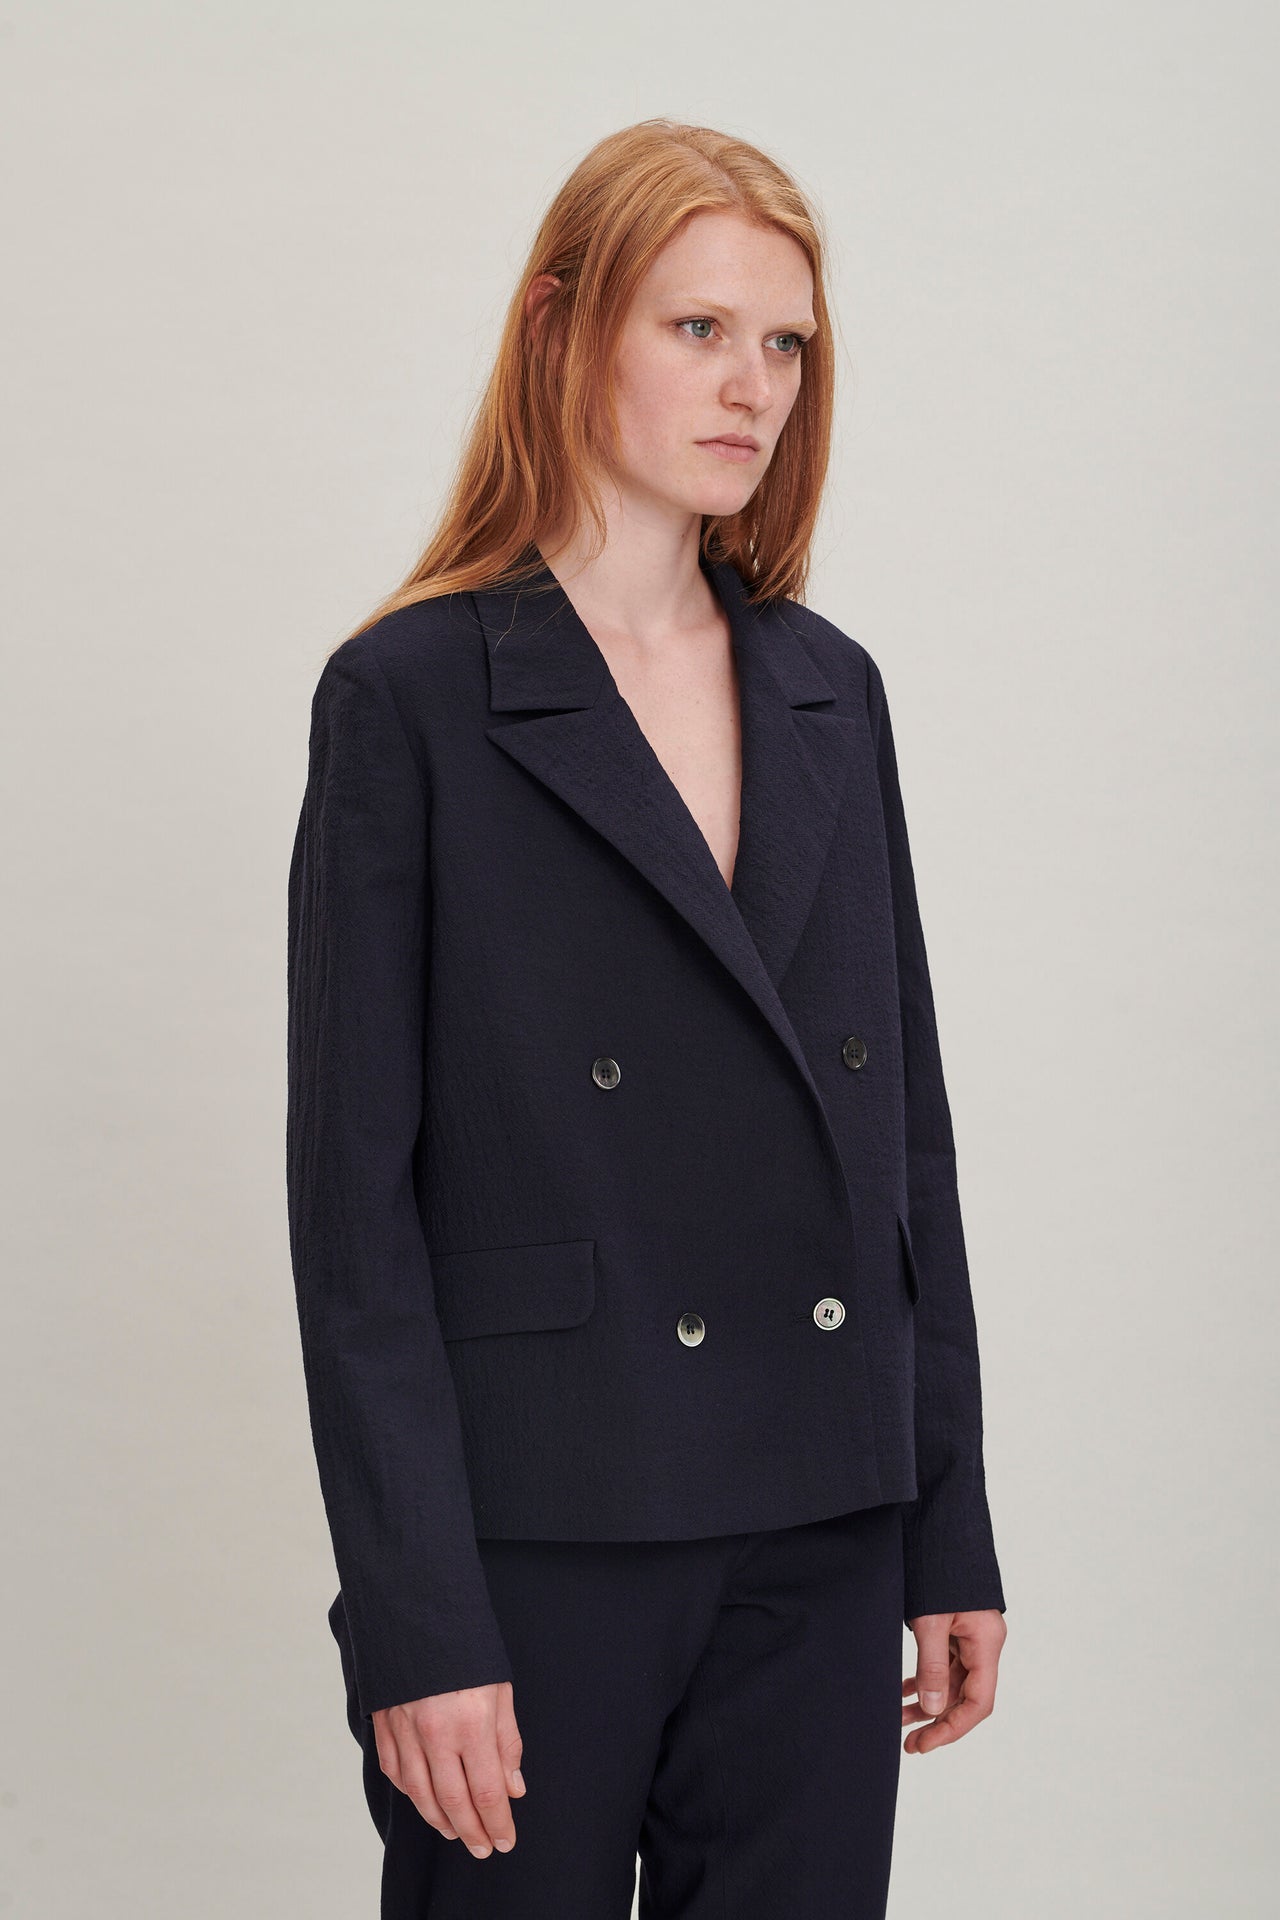 Relaxed Double Breasted Blazer in the Finest Navy Blue Italian Soft Summer Merino Wool by Bonotto